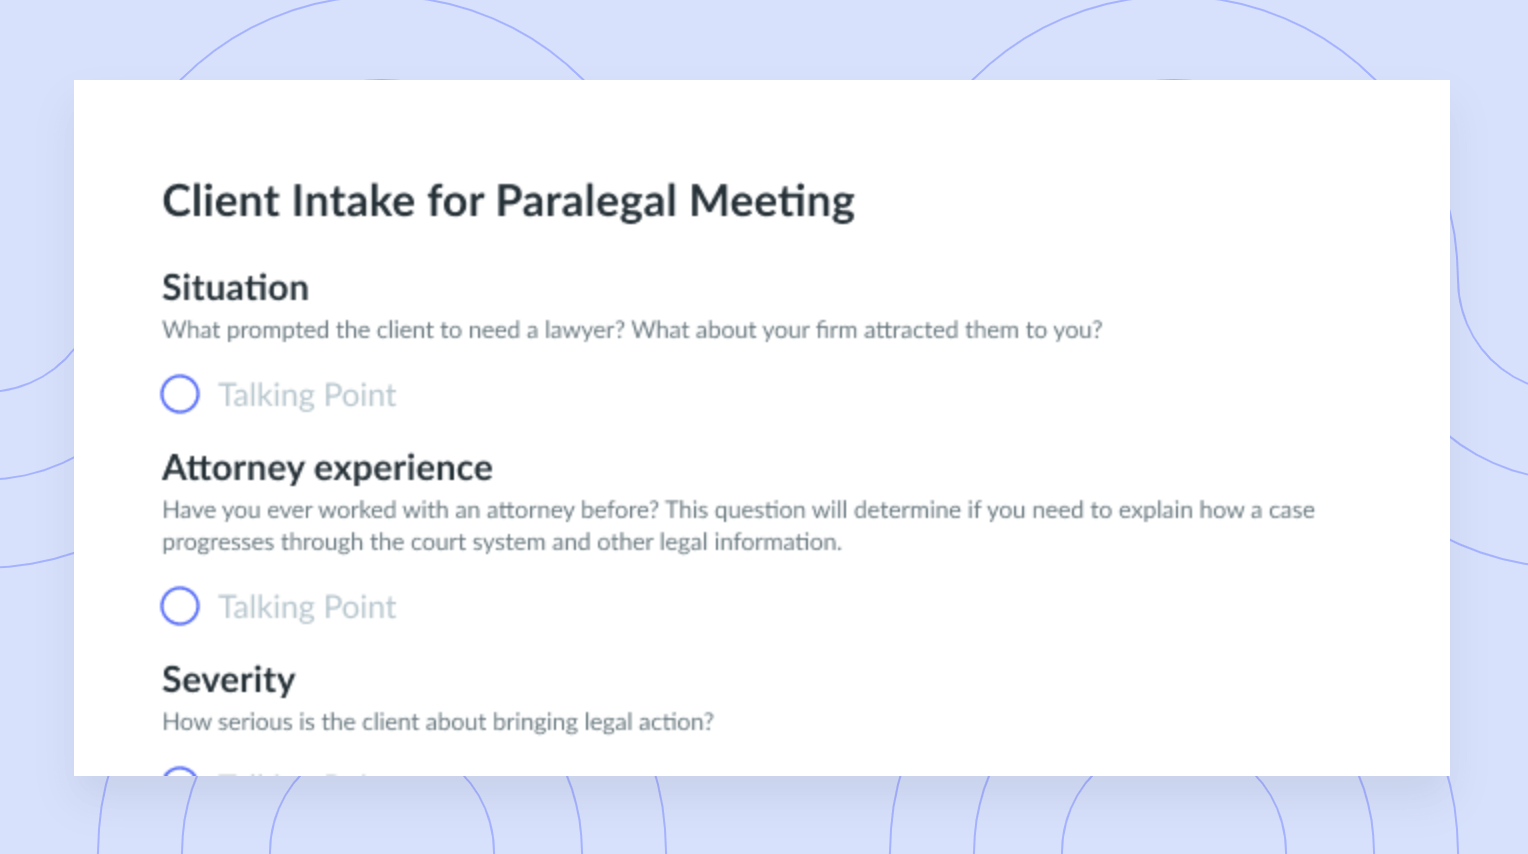 Client Intake for Paralegal Meeting Template